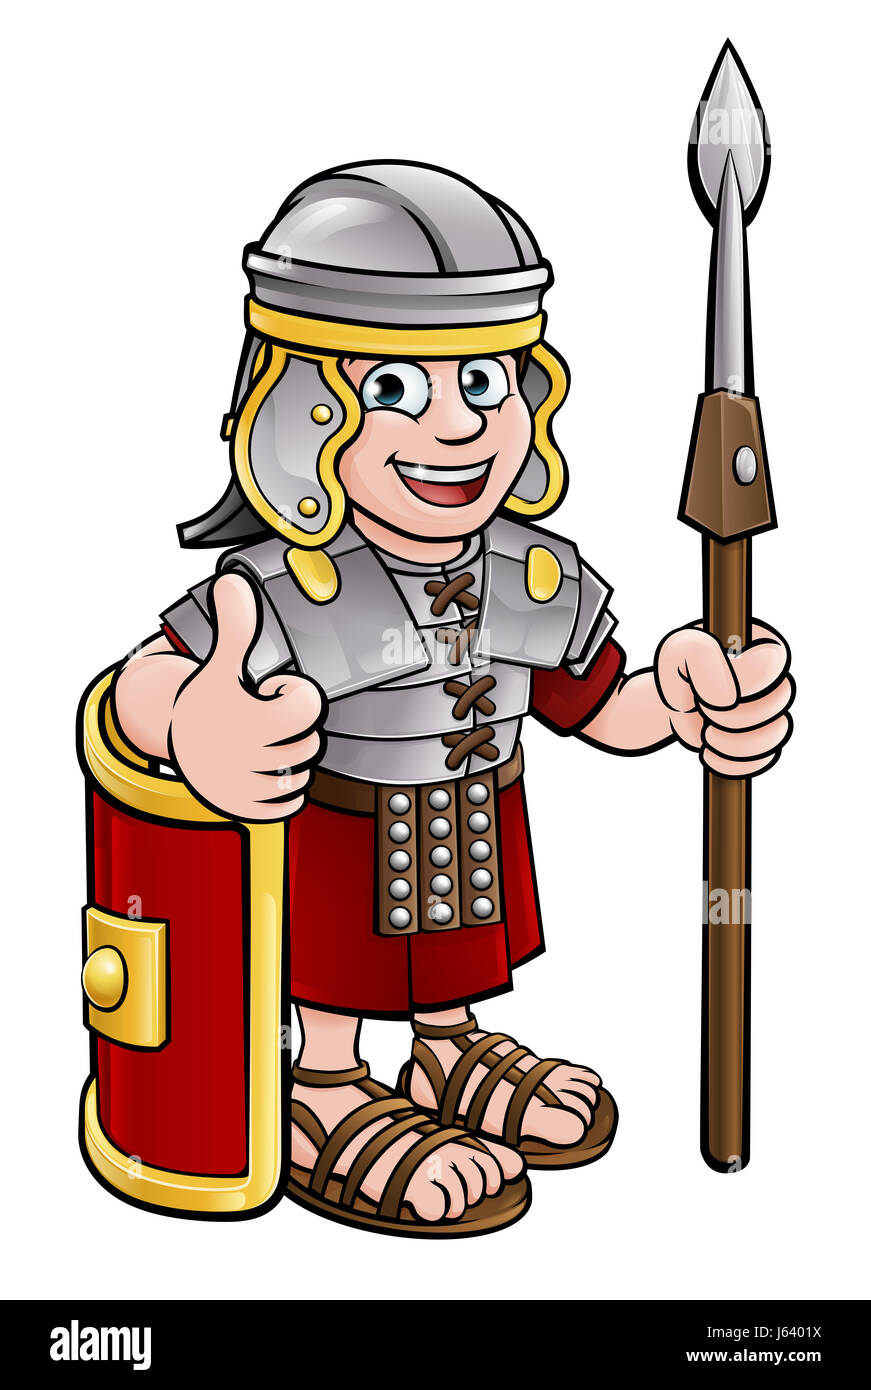 A Roman soldier cartoon character holding a spear and giving a thumbs up Stock Photo